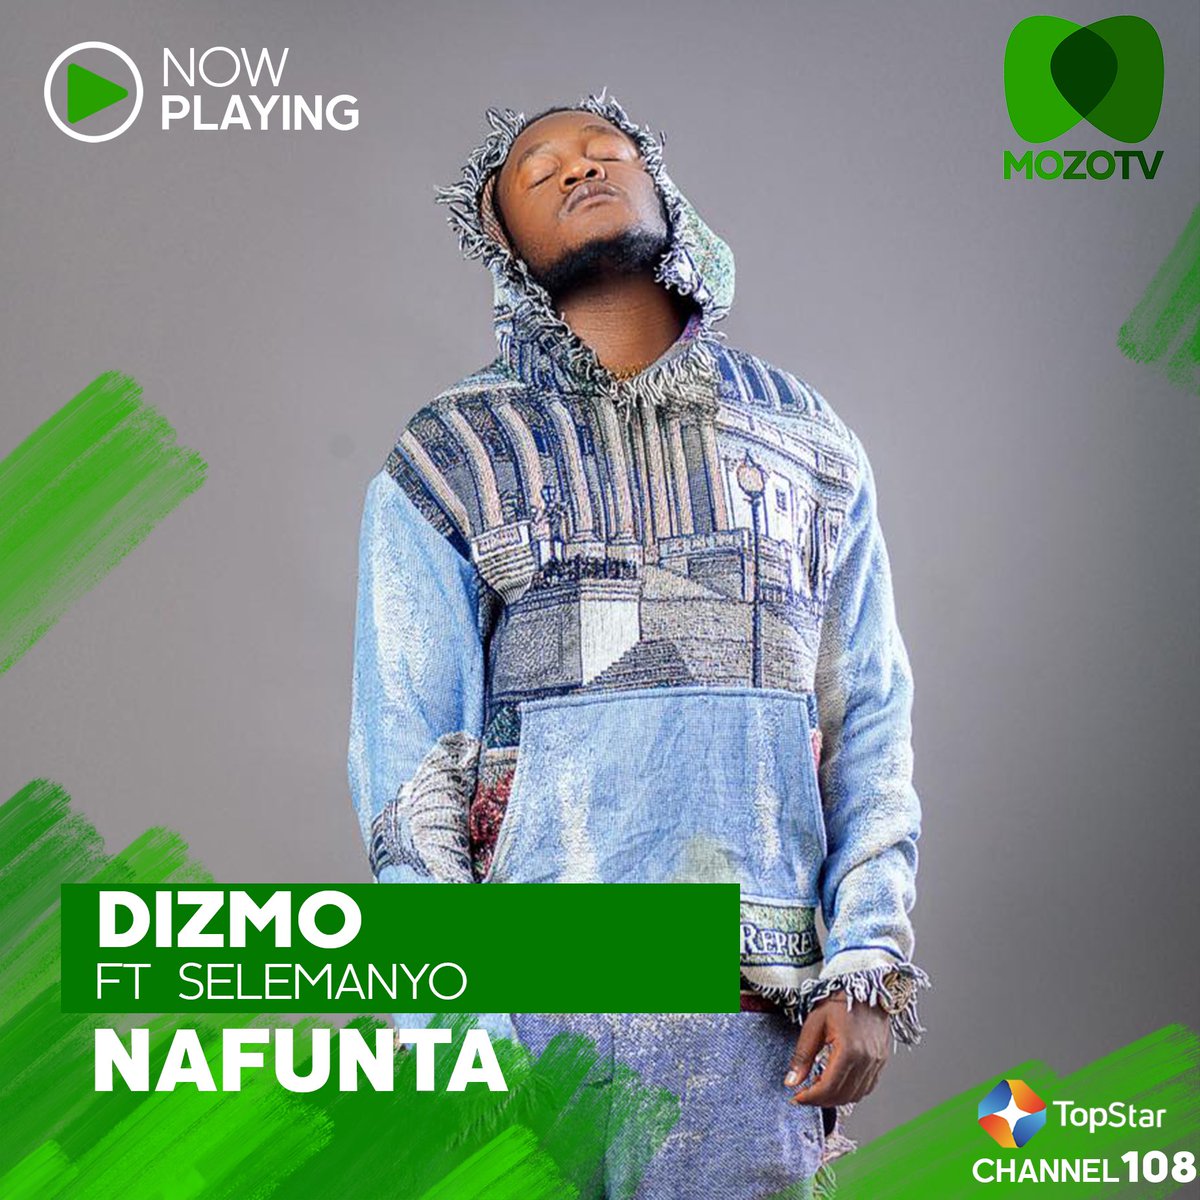 Dizmo ft Selemanyo- Nafunta 💃 #NowPlaying Tune In Now! TopStar Channel 108 and 544 on DTH (Dish)💚 Also, install the Startimes APP via the link below 👇🏾: play.google.com/store/apps/det…... #ARefreshingExperience #NowPlaying